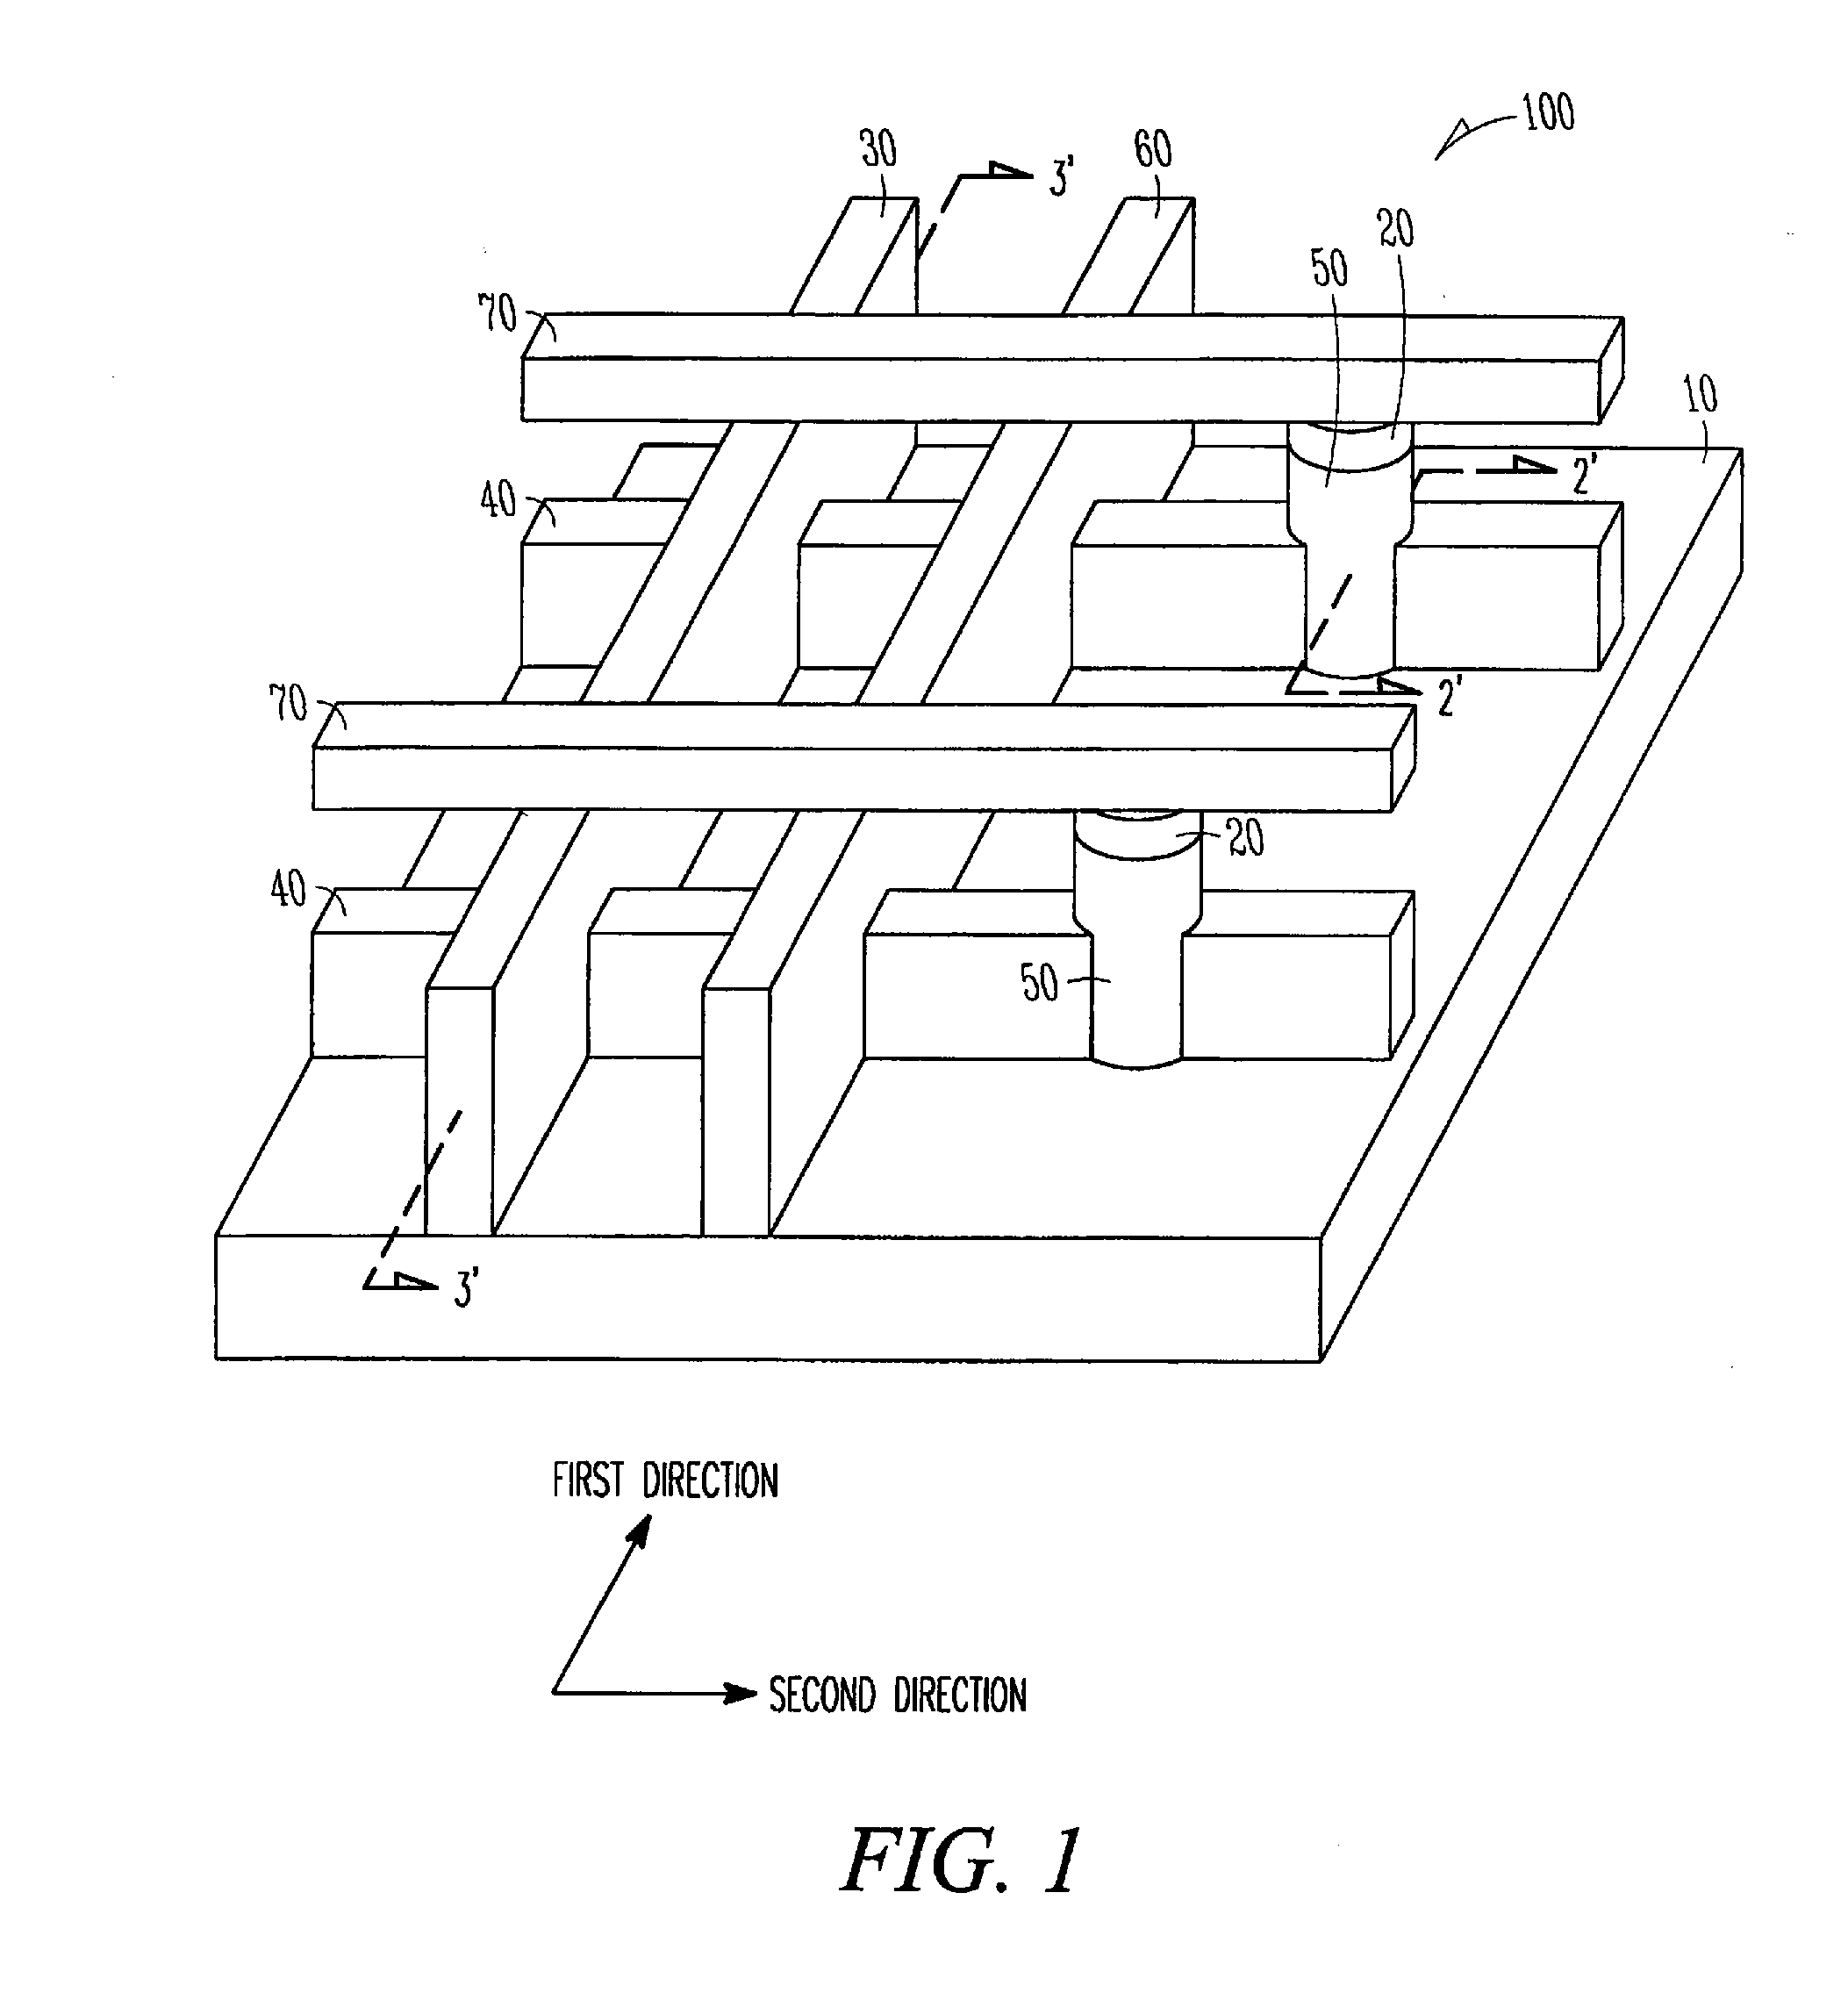 Apparatus of memory array using finfets